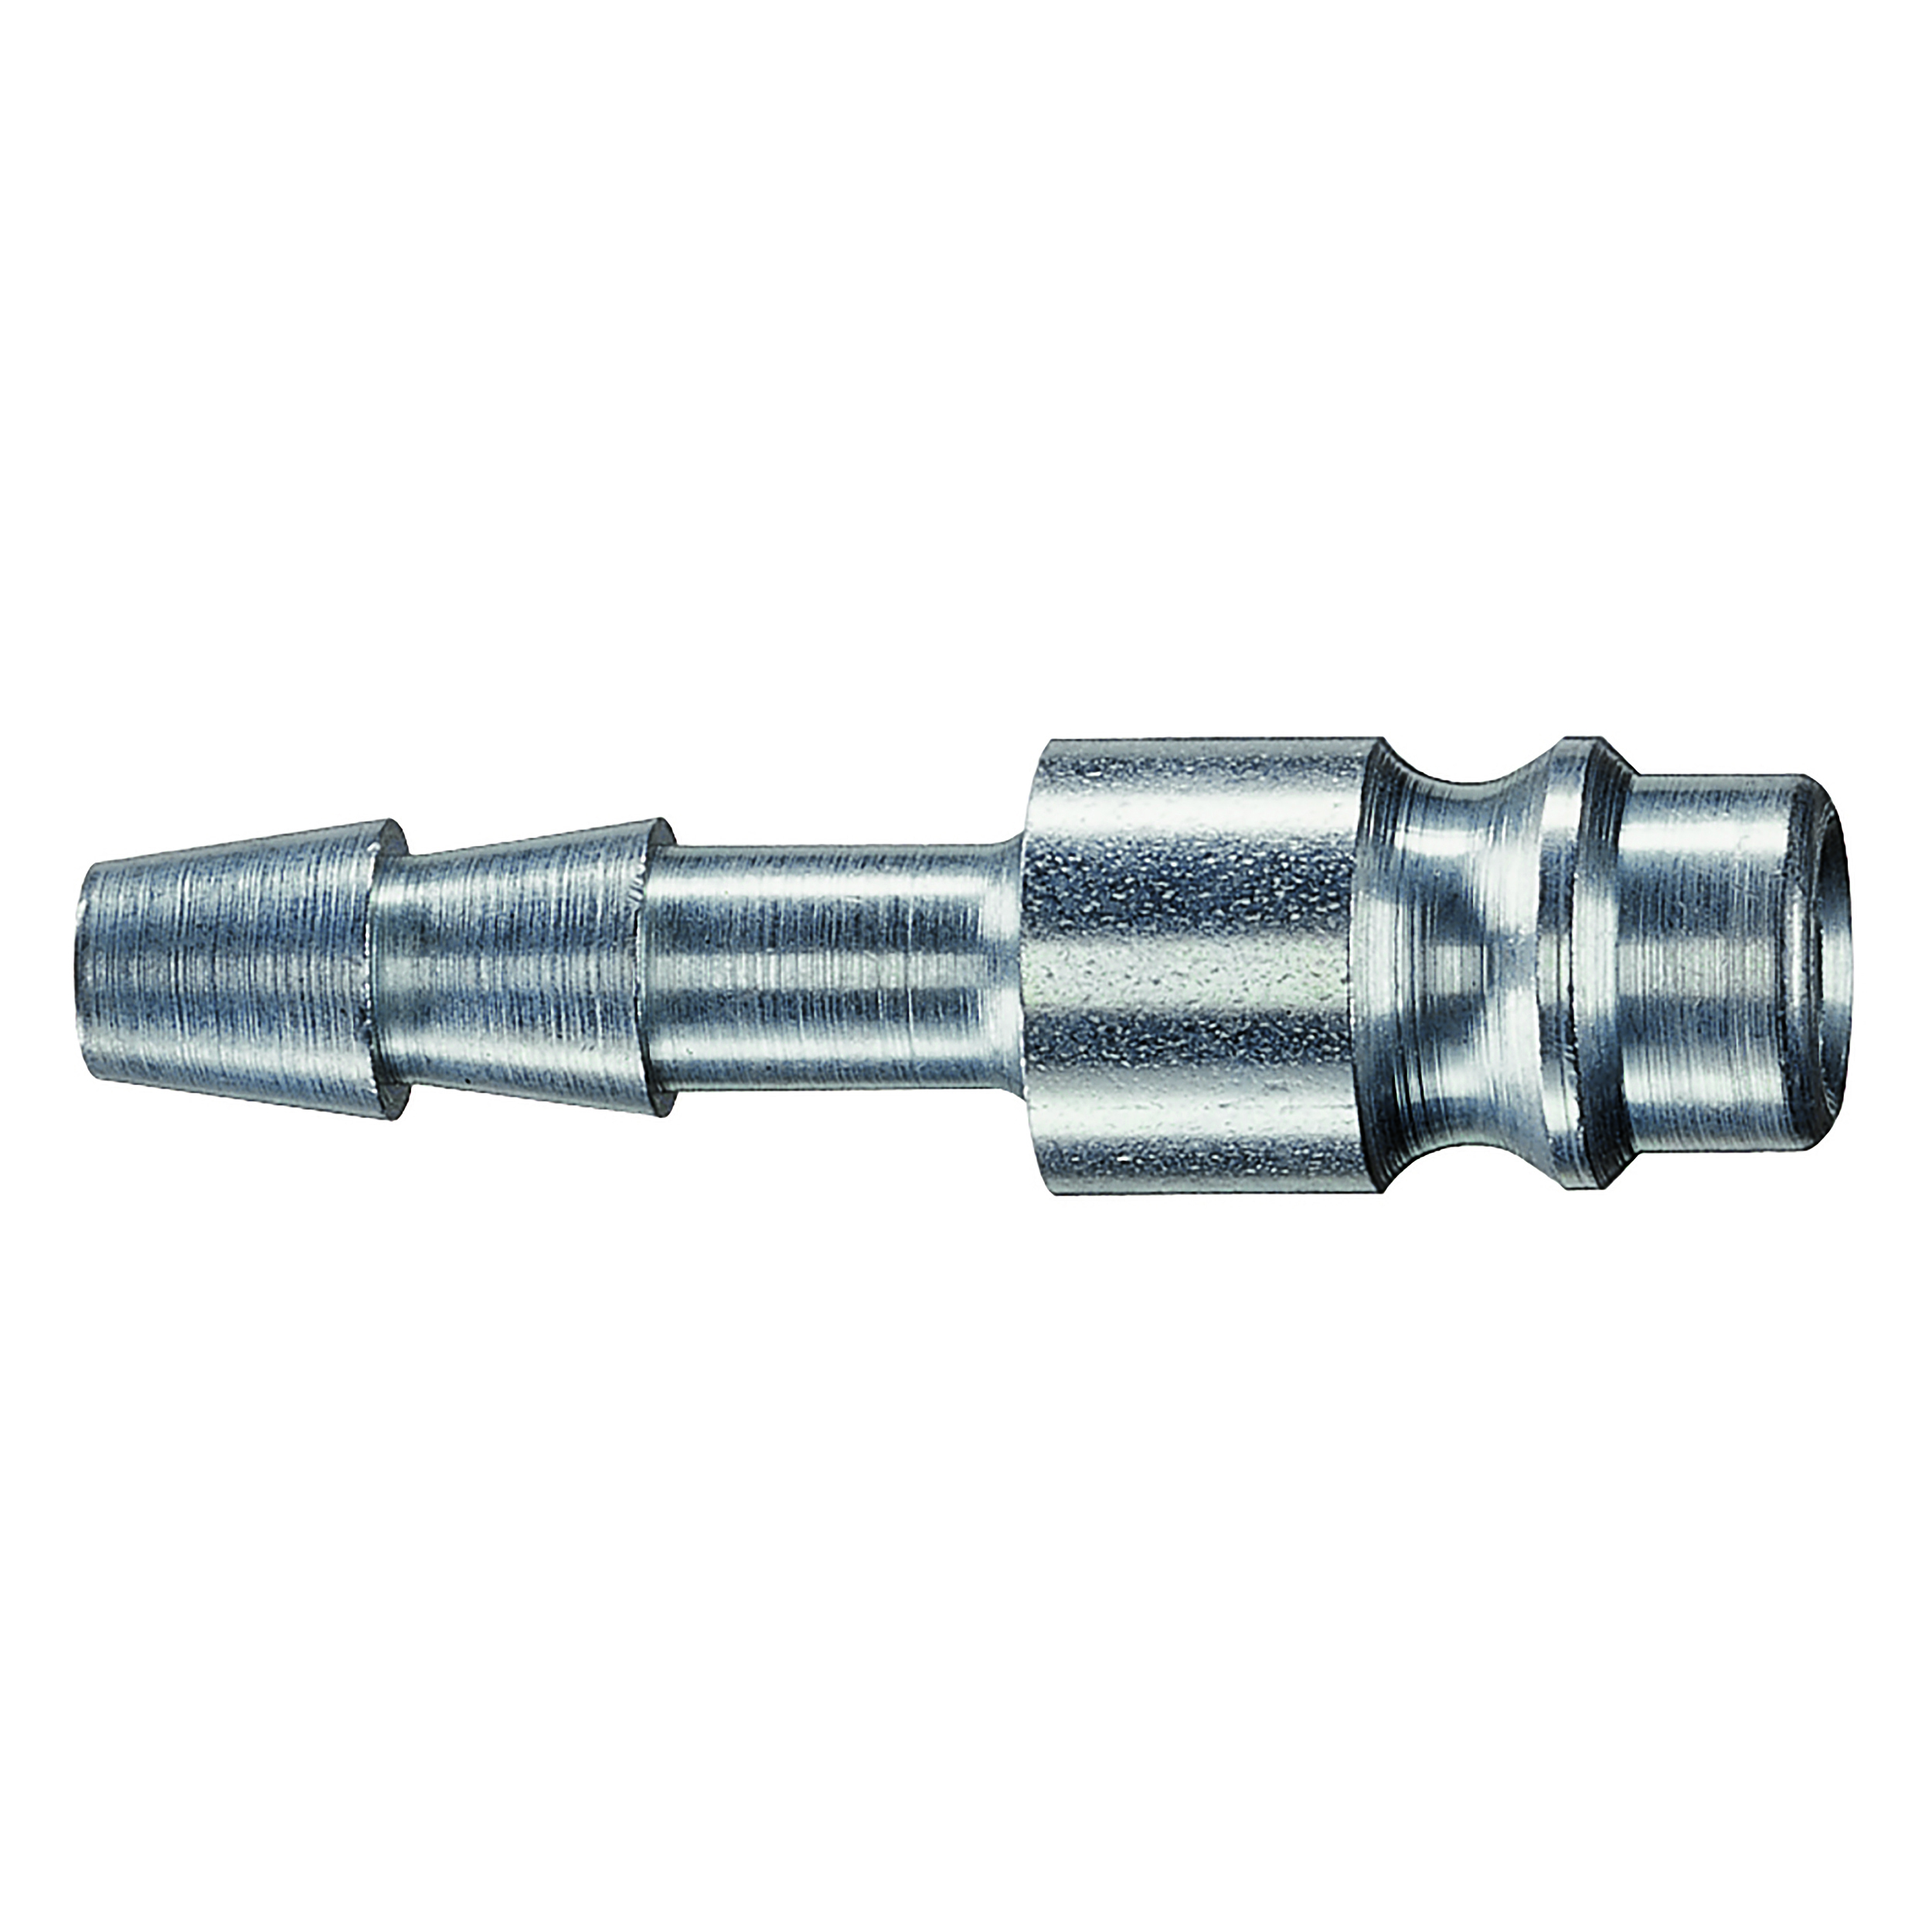 DN 7.2 plug, europrofile, stainless steel, hose nozzle